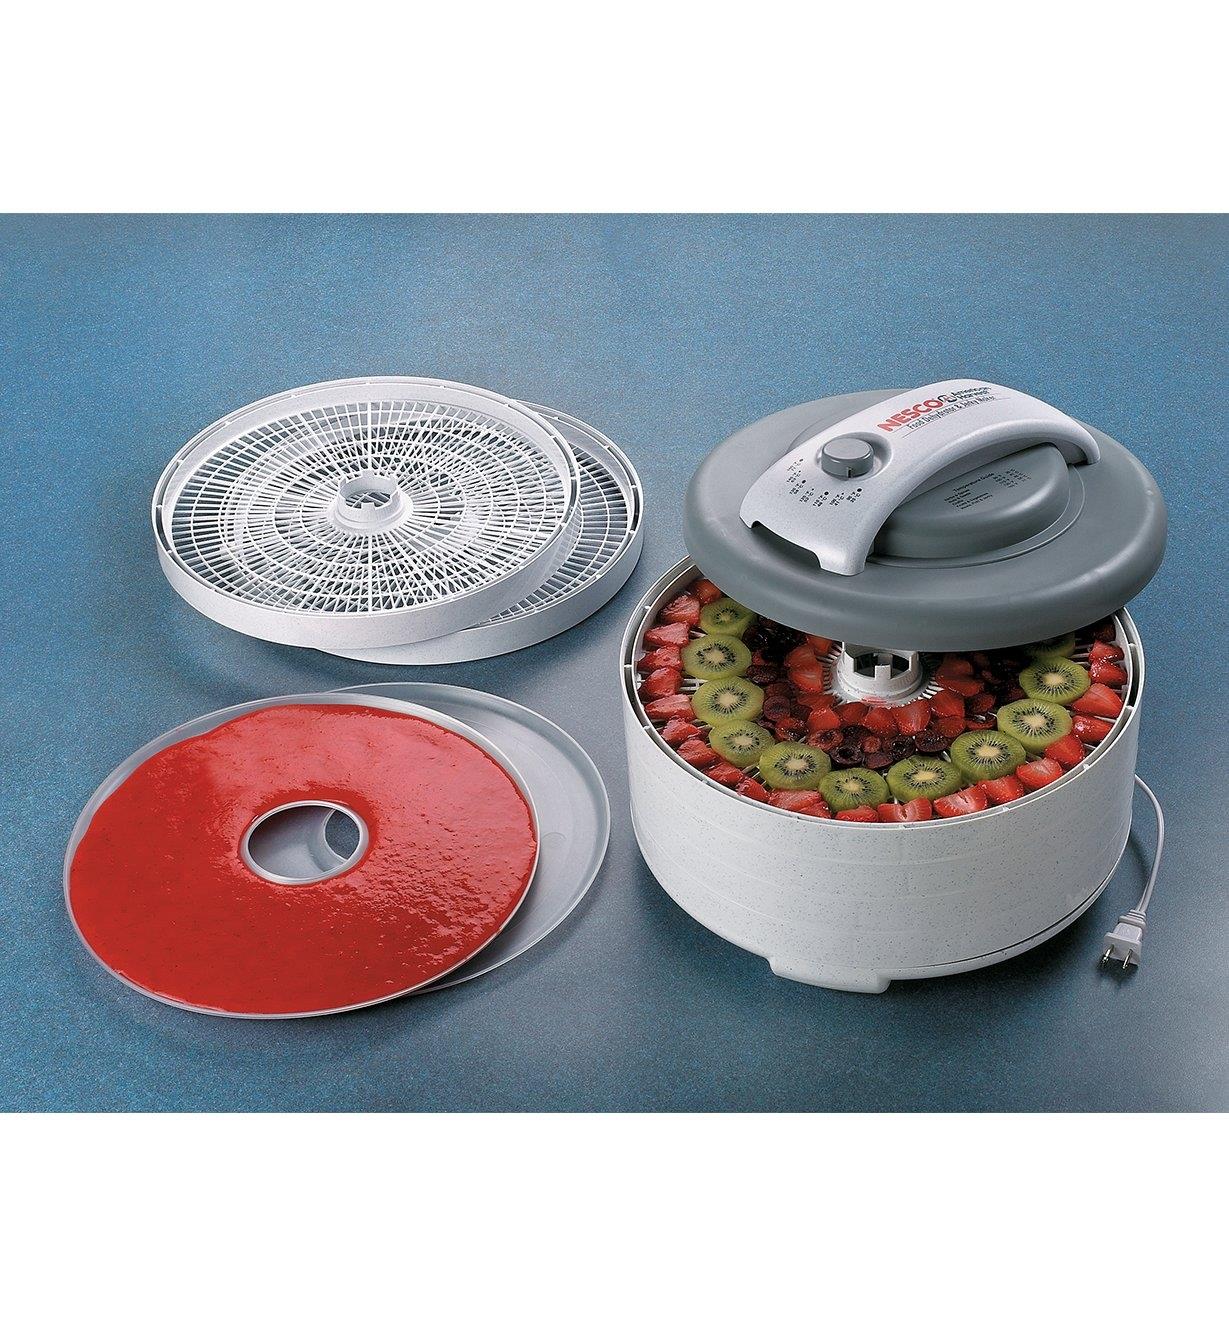 Food Dehydrator containing fresh fruit slices, with a filled fruit roll sheet and extra trays sitting beside it